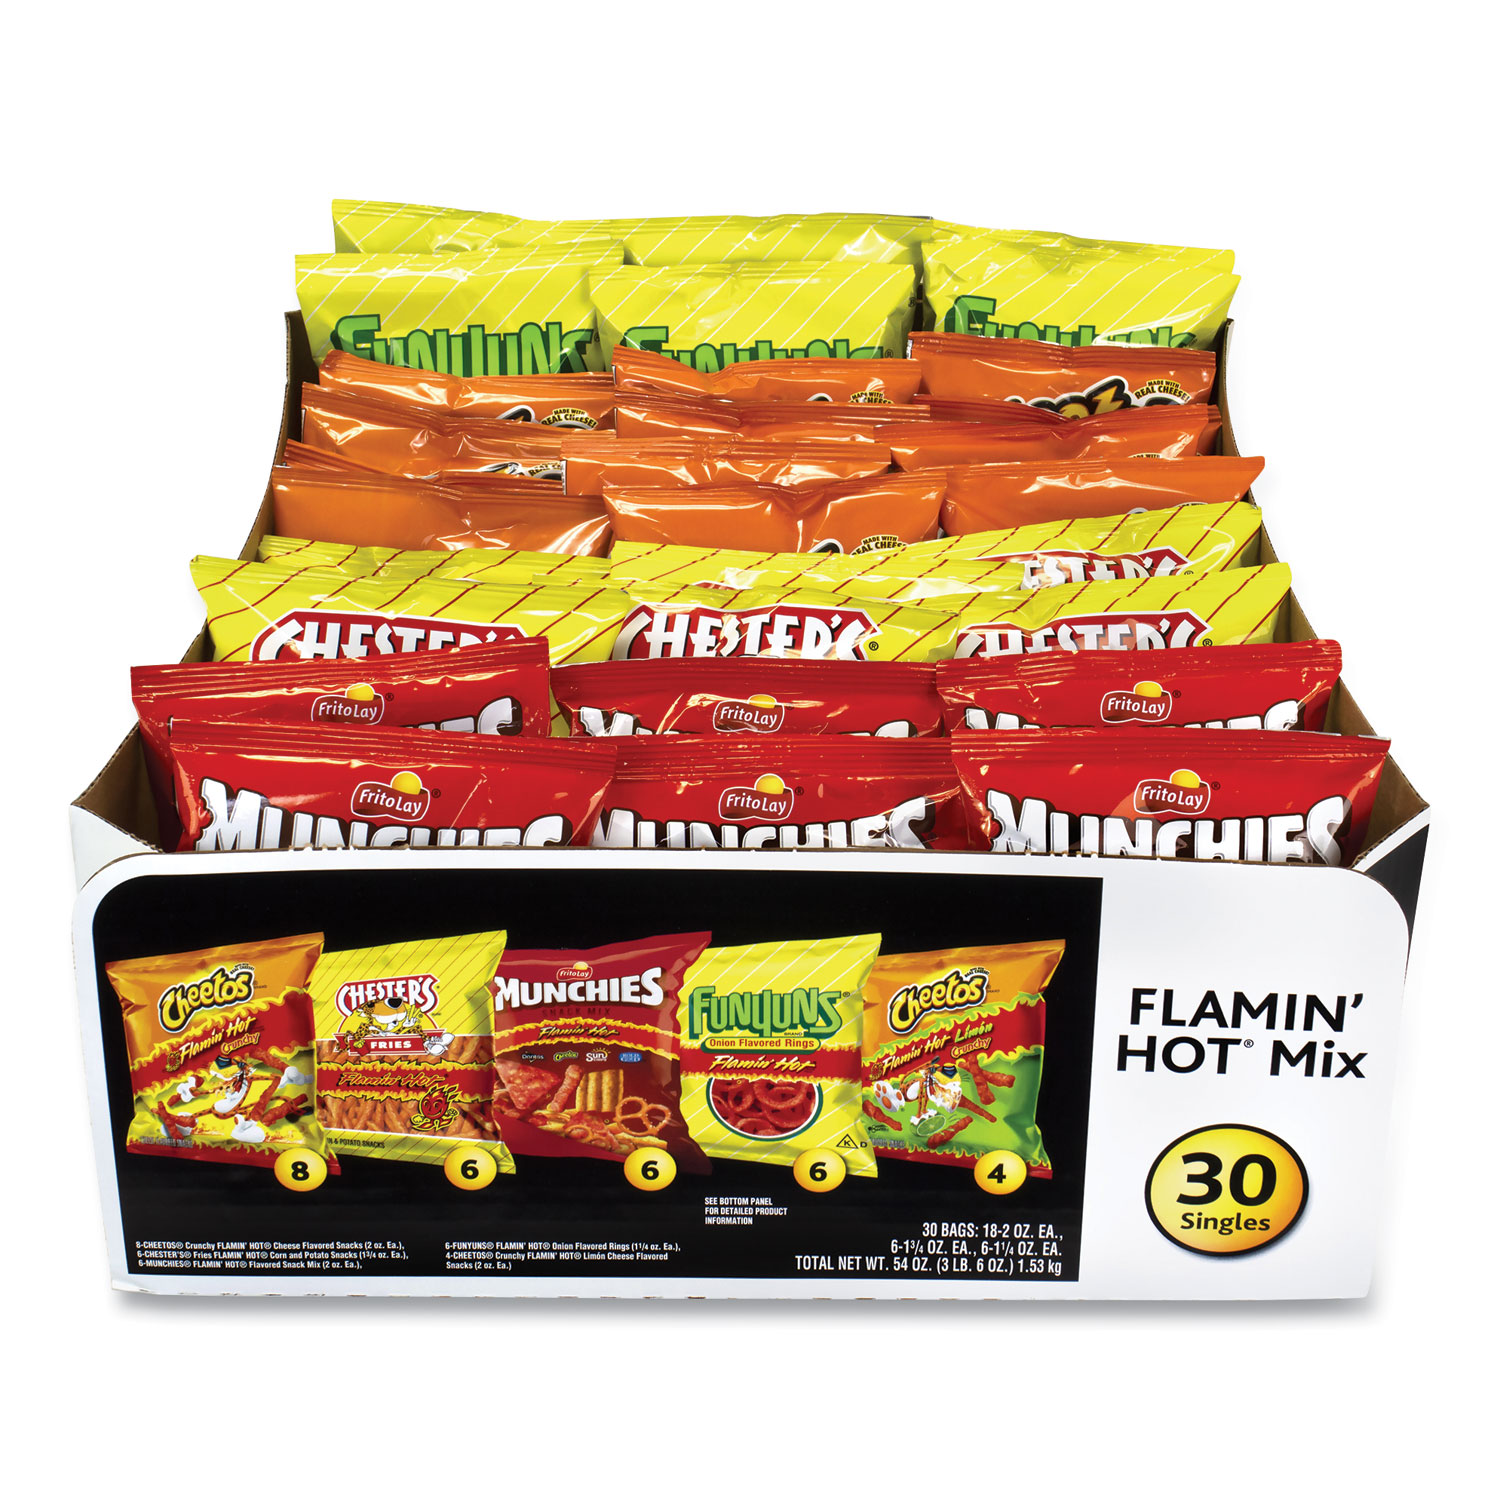  Frito-Lay 27083 Flamin' Hot Mix Variety Pack, Assorted Flavors, Assorted Size Bag, 30 Bags/Carton, Free Delivery in 1-4 Business Days (GRR29500007) 